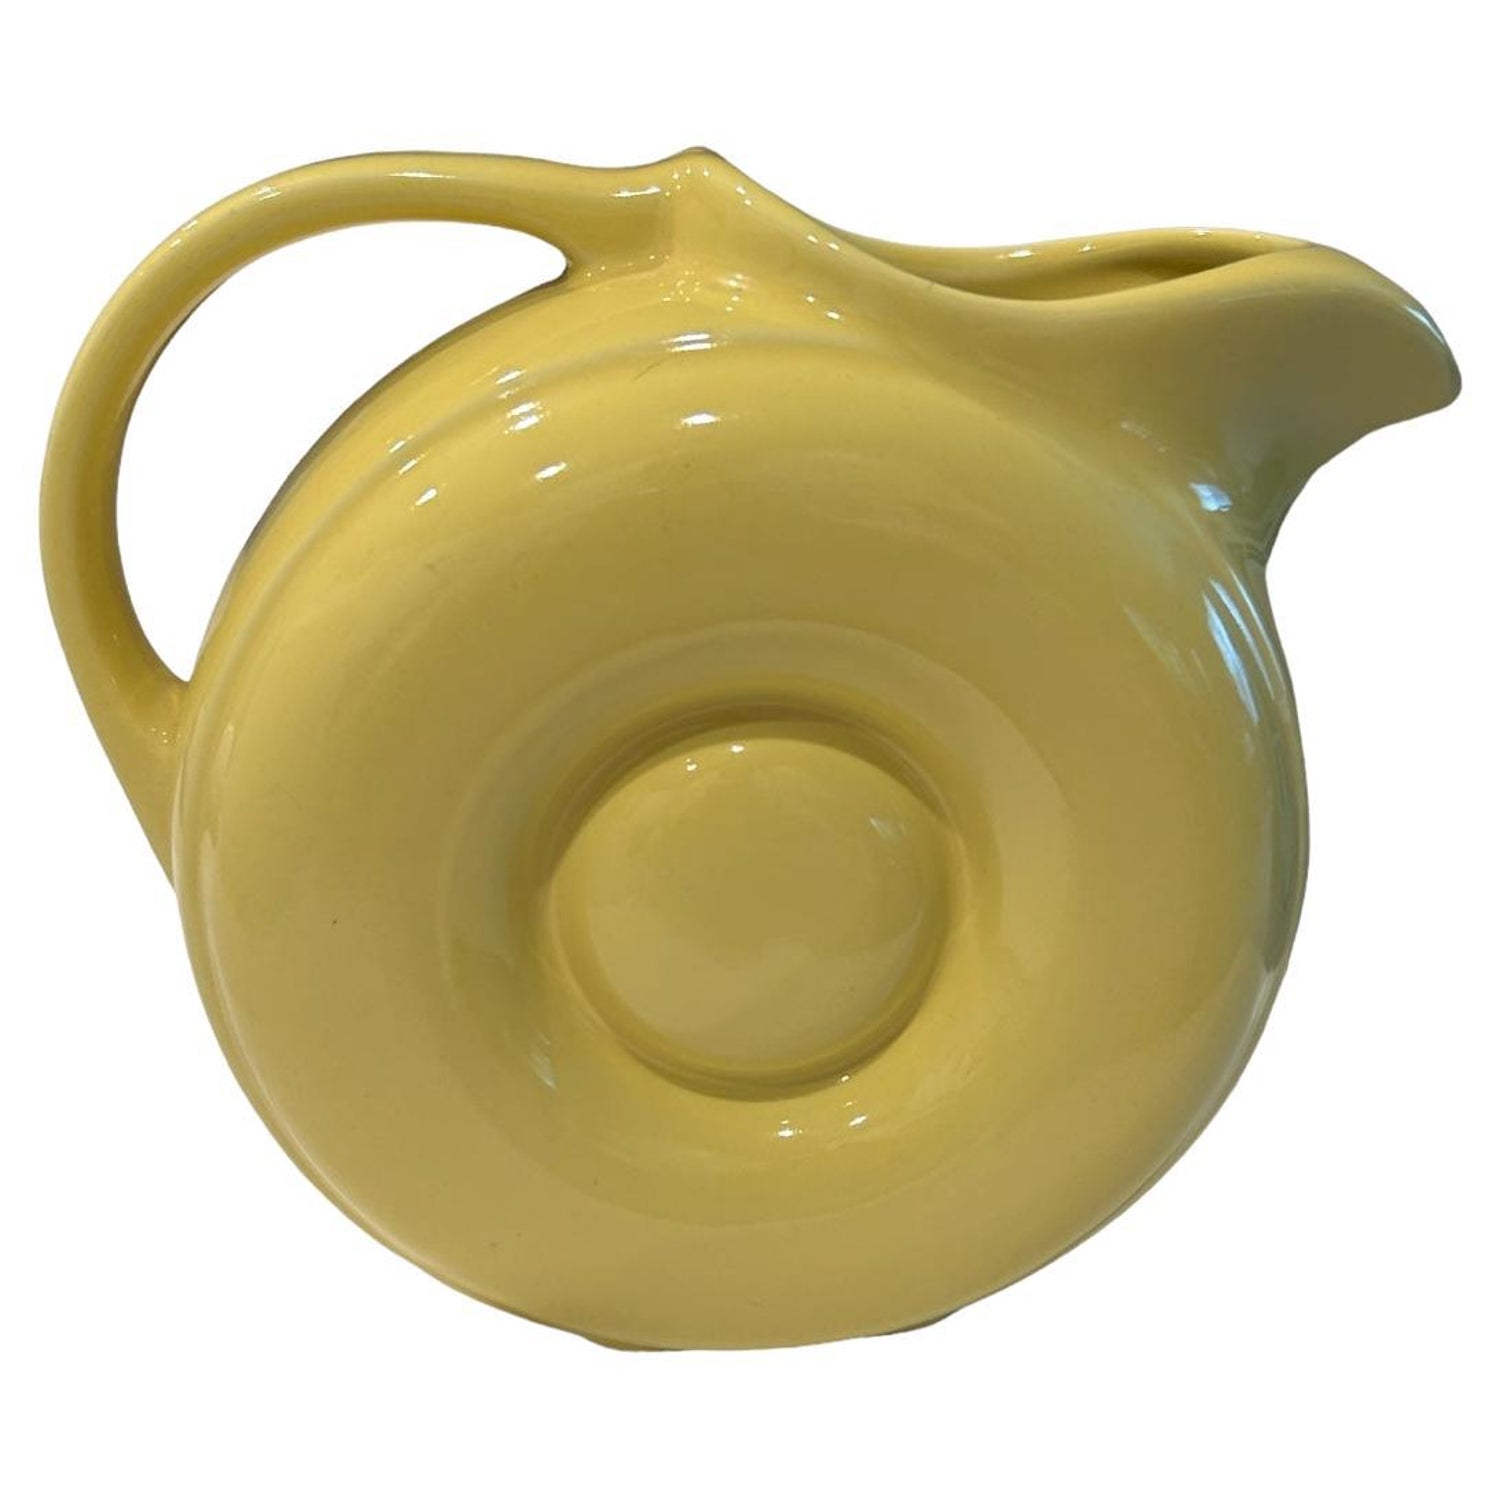 https://a.1stdibscdn.com/vintage-hall-pottery-mid-century-yellow-donut-pitcher-w-ice-lip-for-sale/f_80852/f_339682621682373371140/f_33968262_1682373371421_bg_processed.jpg?width=1500